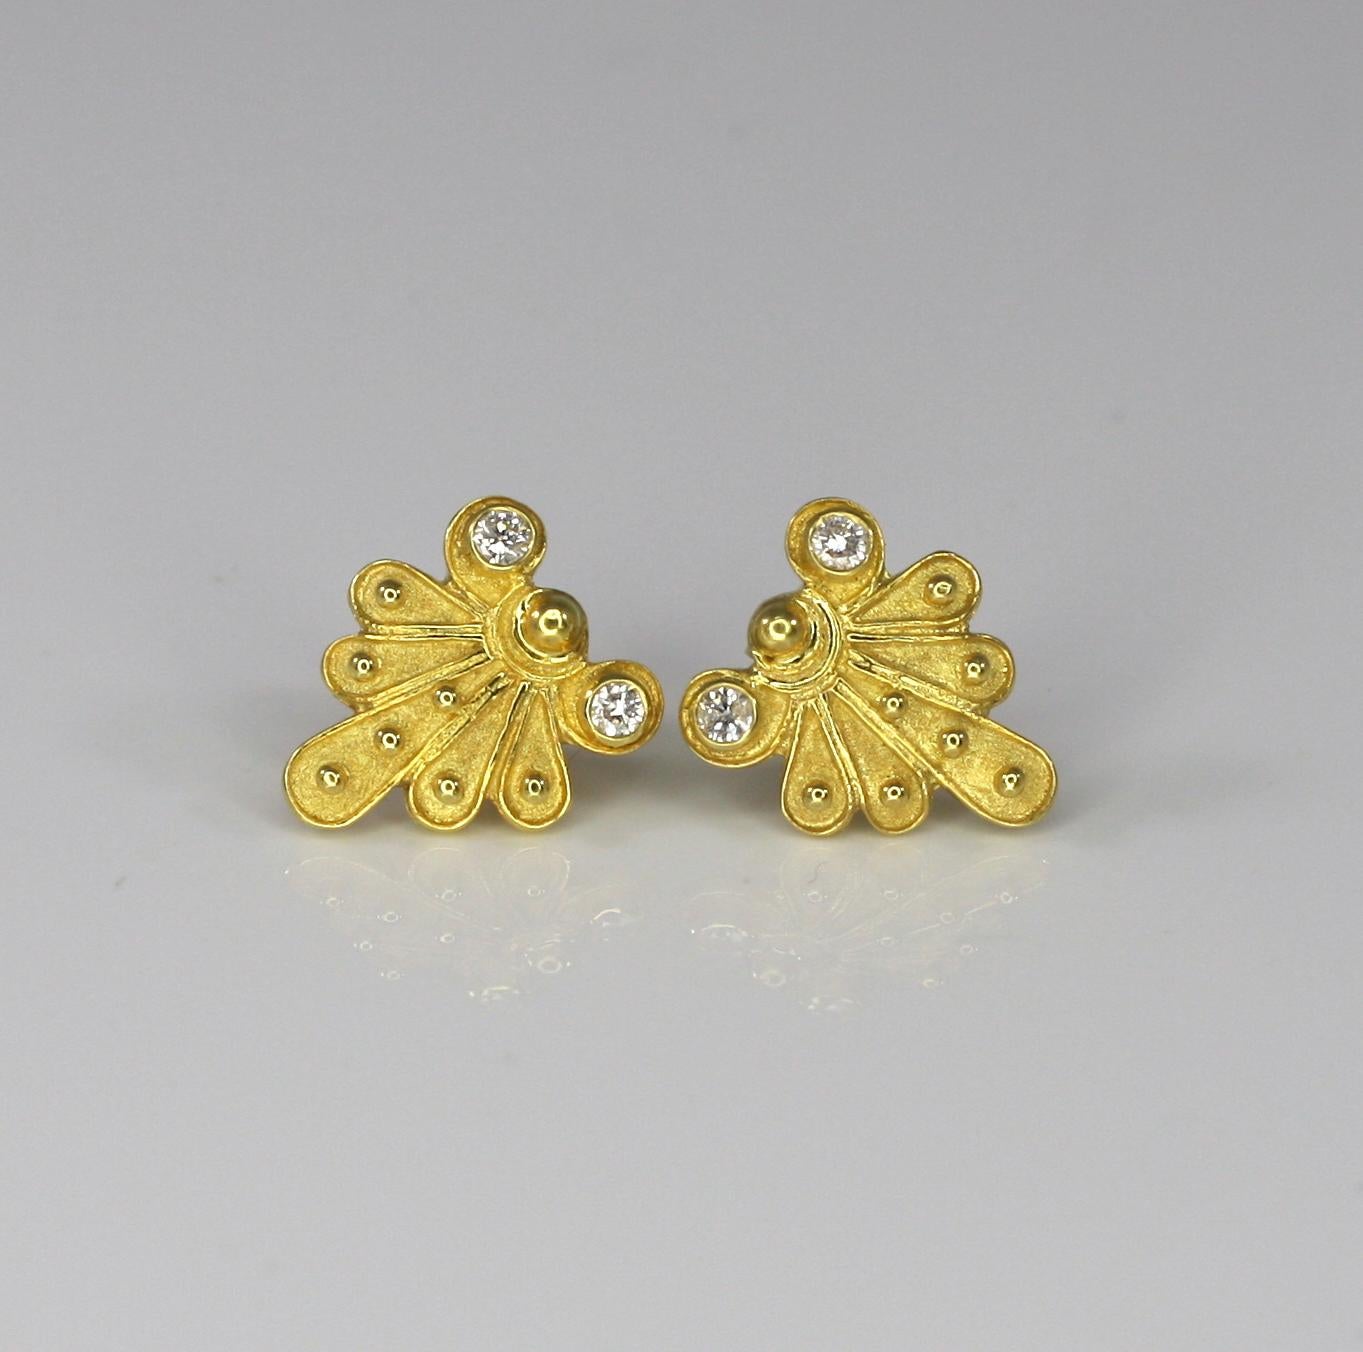 Round Cut Georgios Collections 18 Karat Yellow Gold Diamond Earrings in Byzantine Style